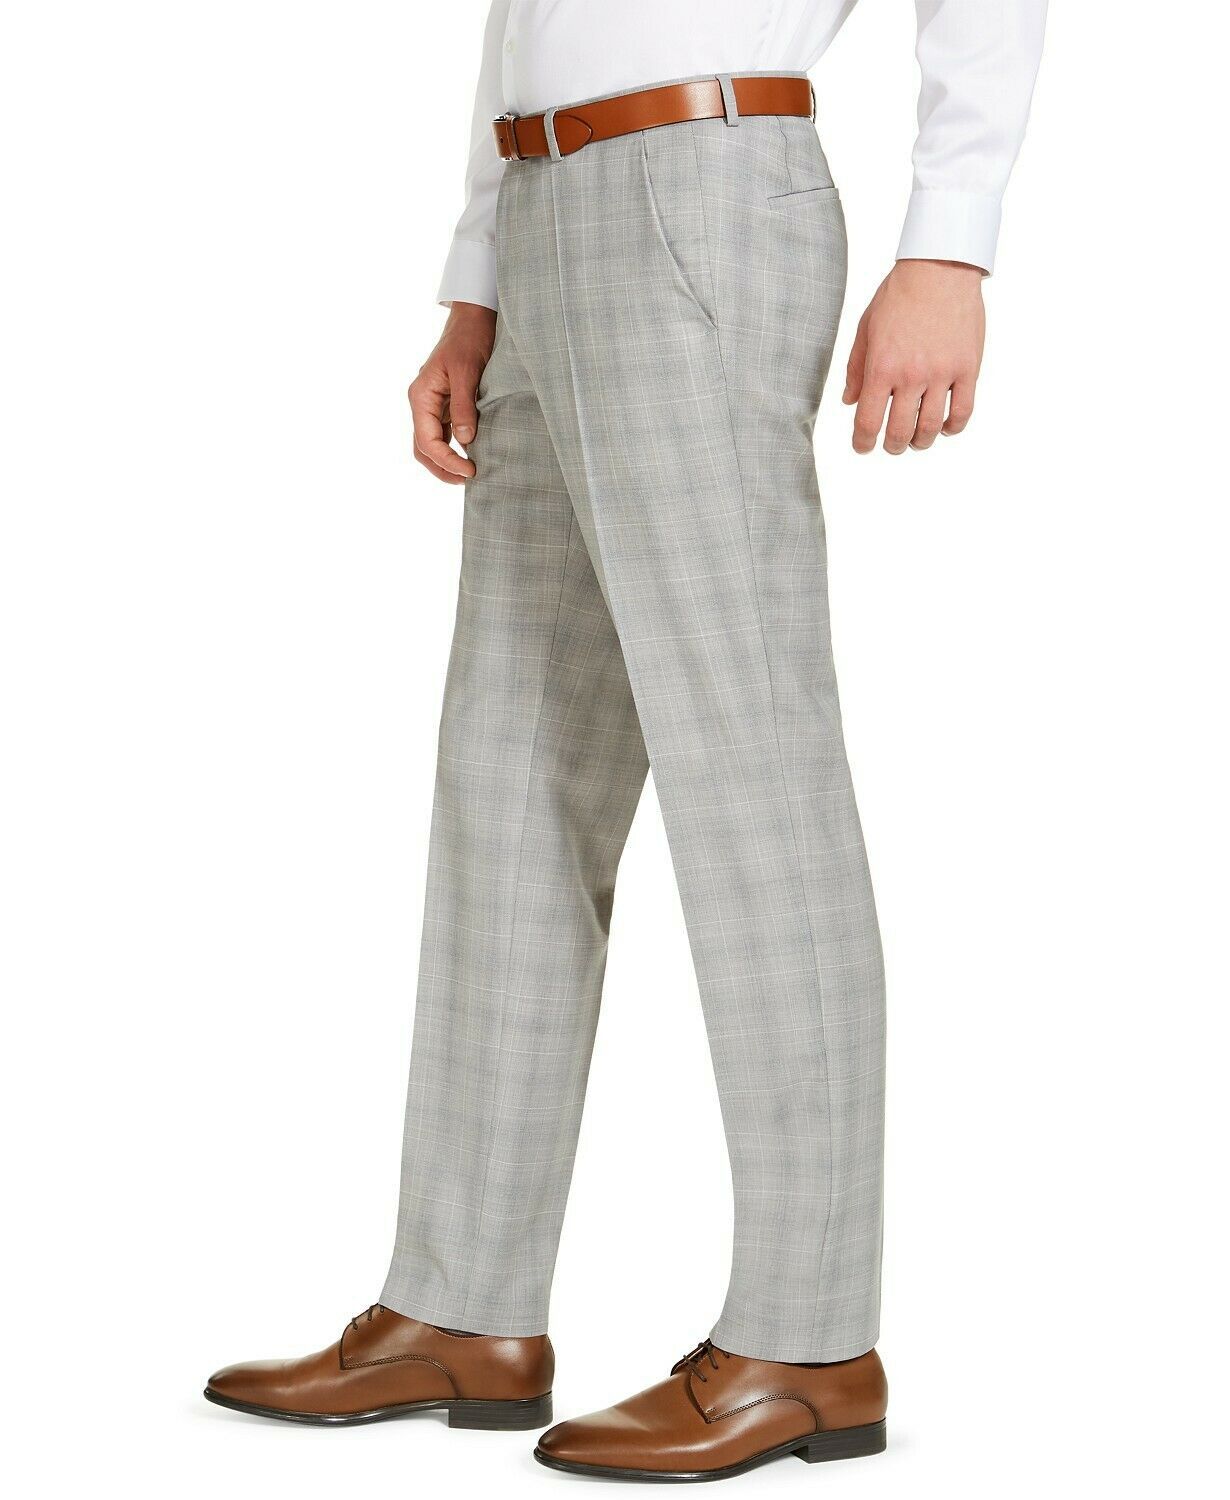 Color: Grays Size Type: Regular Bottoms Size (Men's): 30 Inseam: 32 Type: Pants Style: Dress Pants Occasion: Business Material: 100% Wool